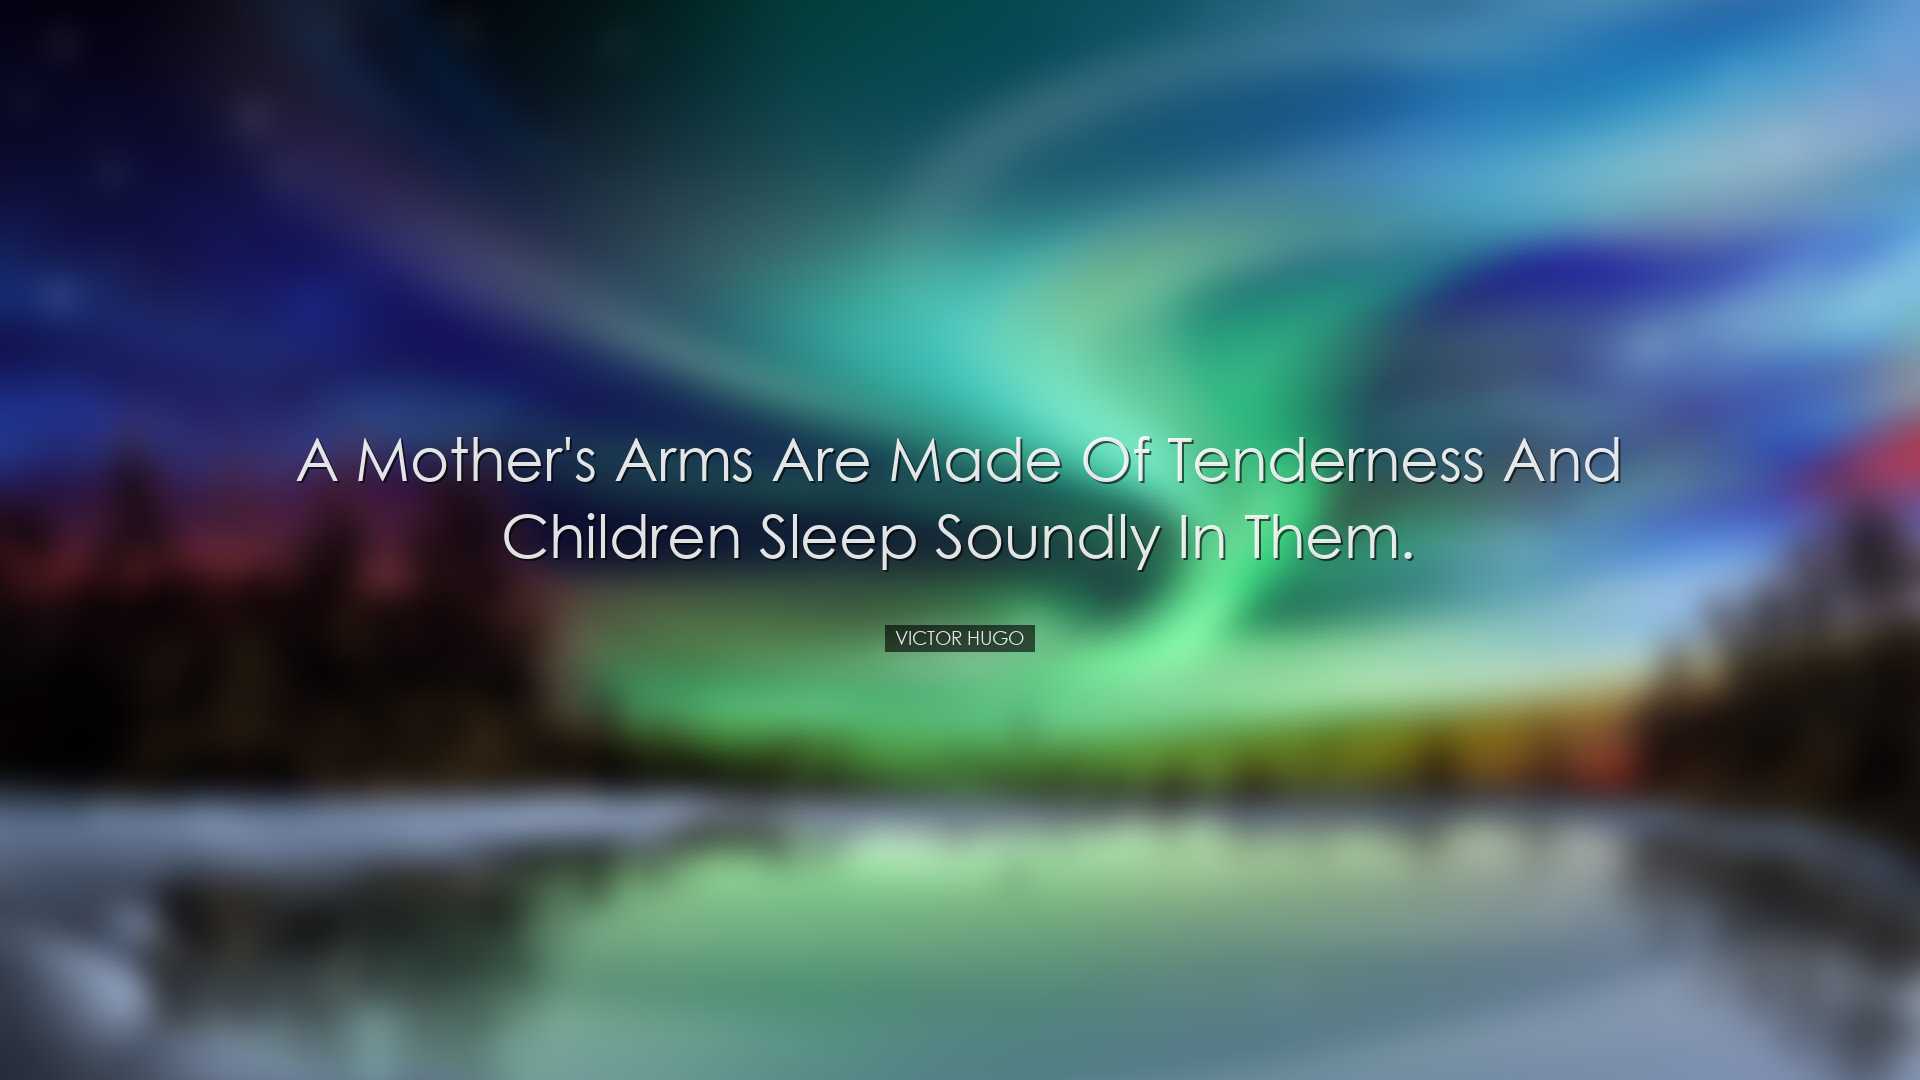 A mother's arms are made of tenderness and children sleep soundly